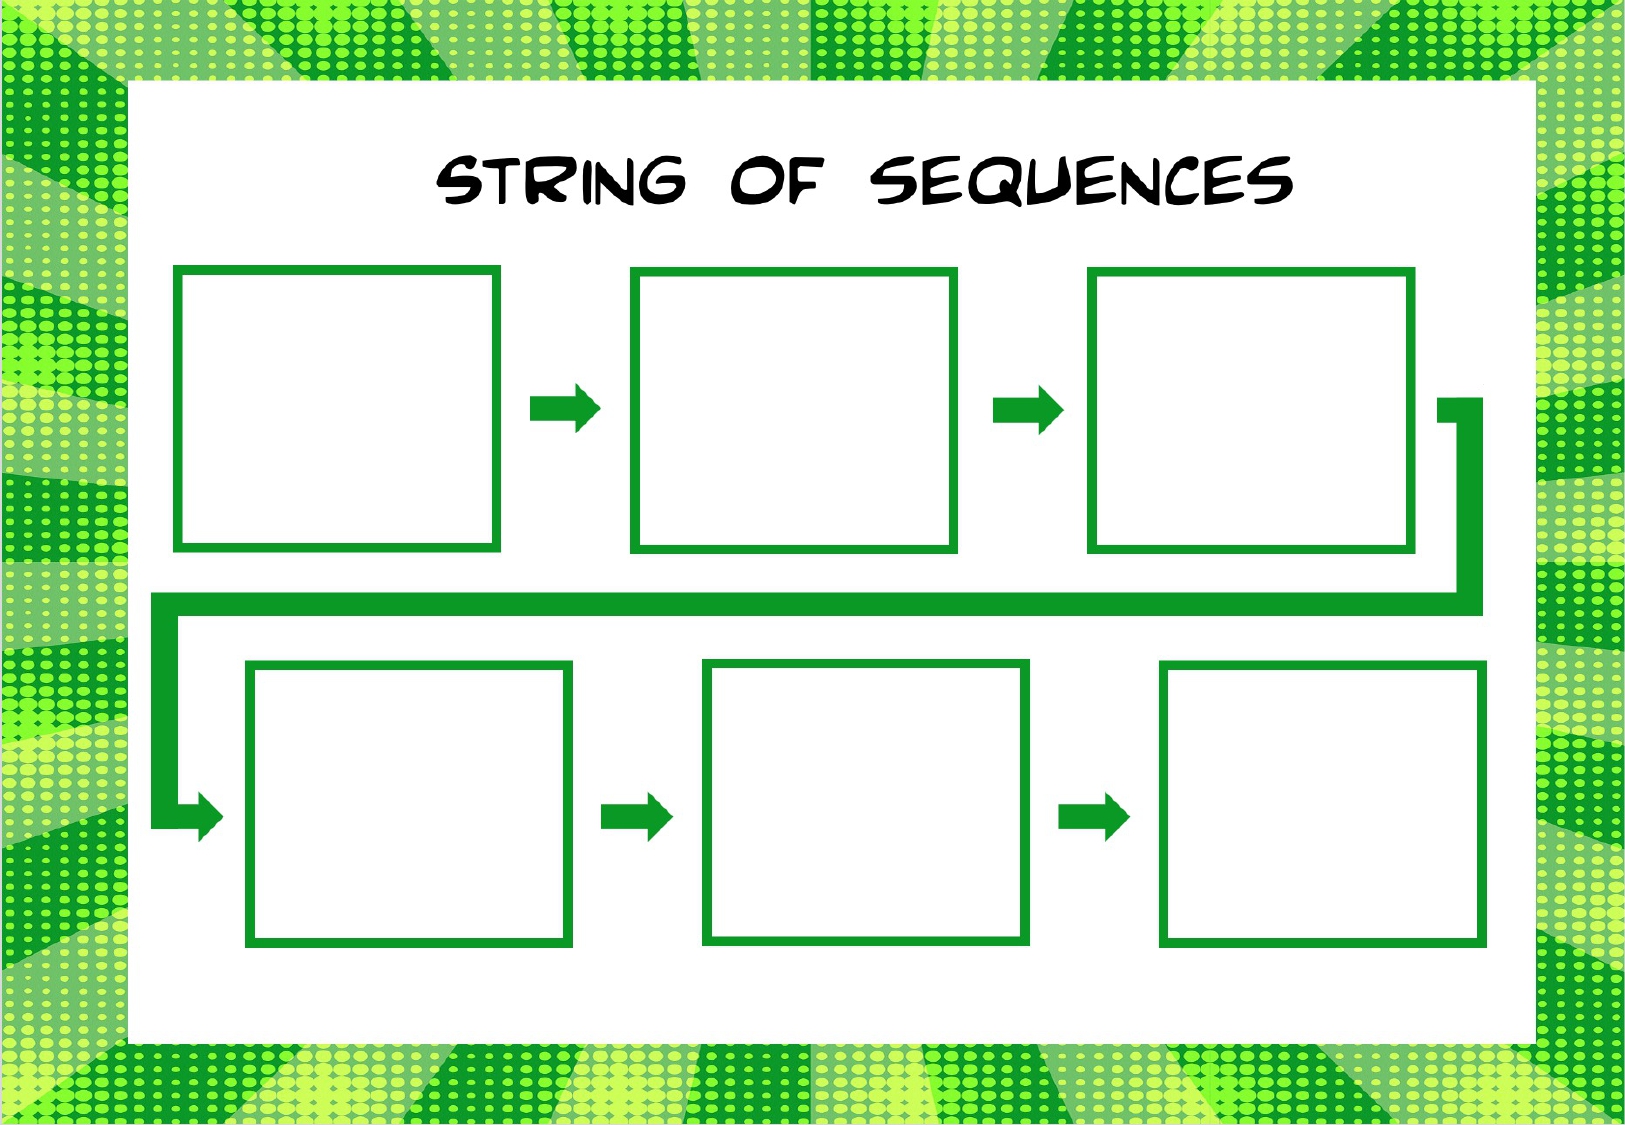 String of sequences